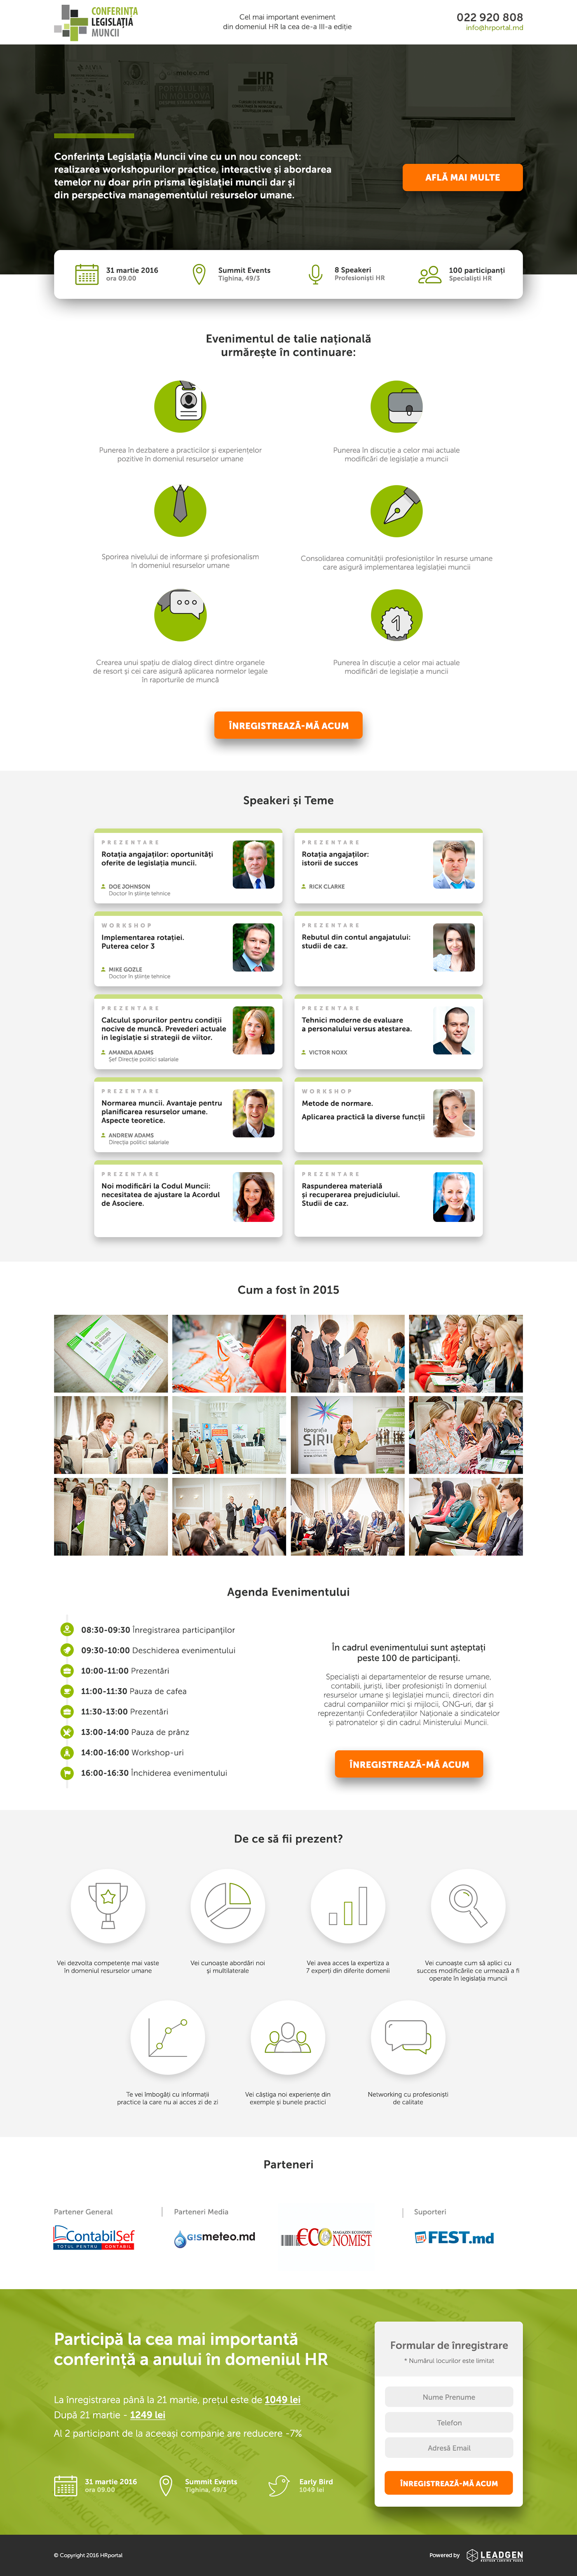 conference landing page landing HR Human Resources inspiration